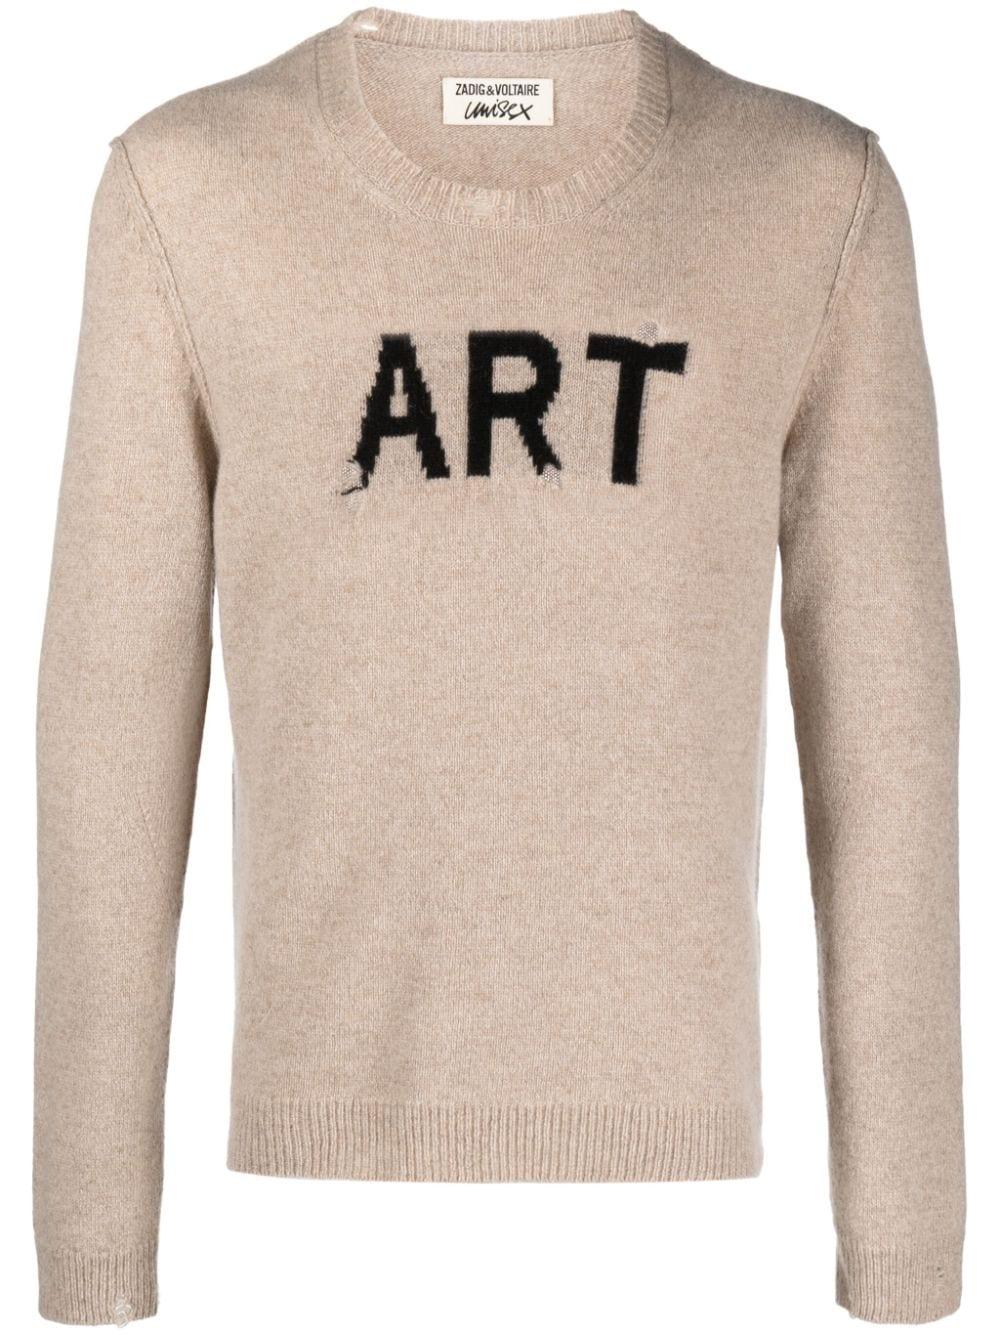 Zadig & Voltaire Intarsia-knit Ripped Jumper in Natural | Lyst